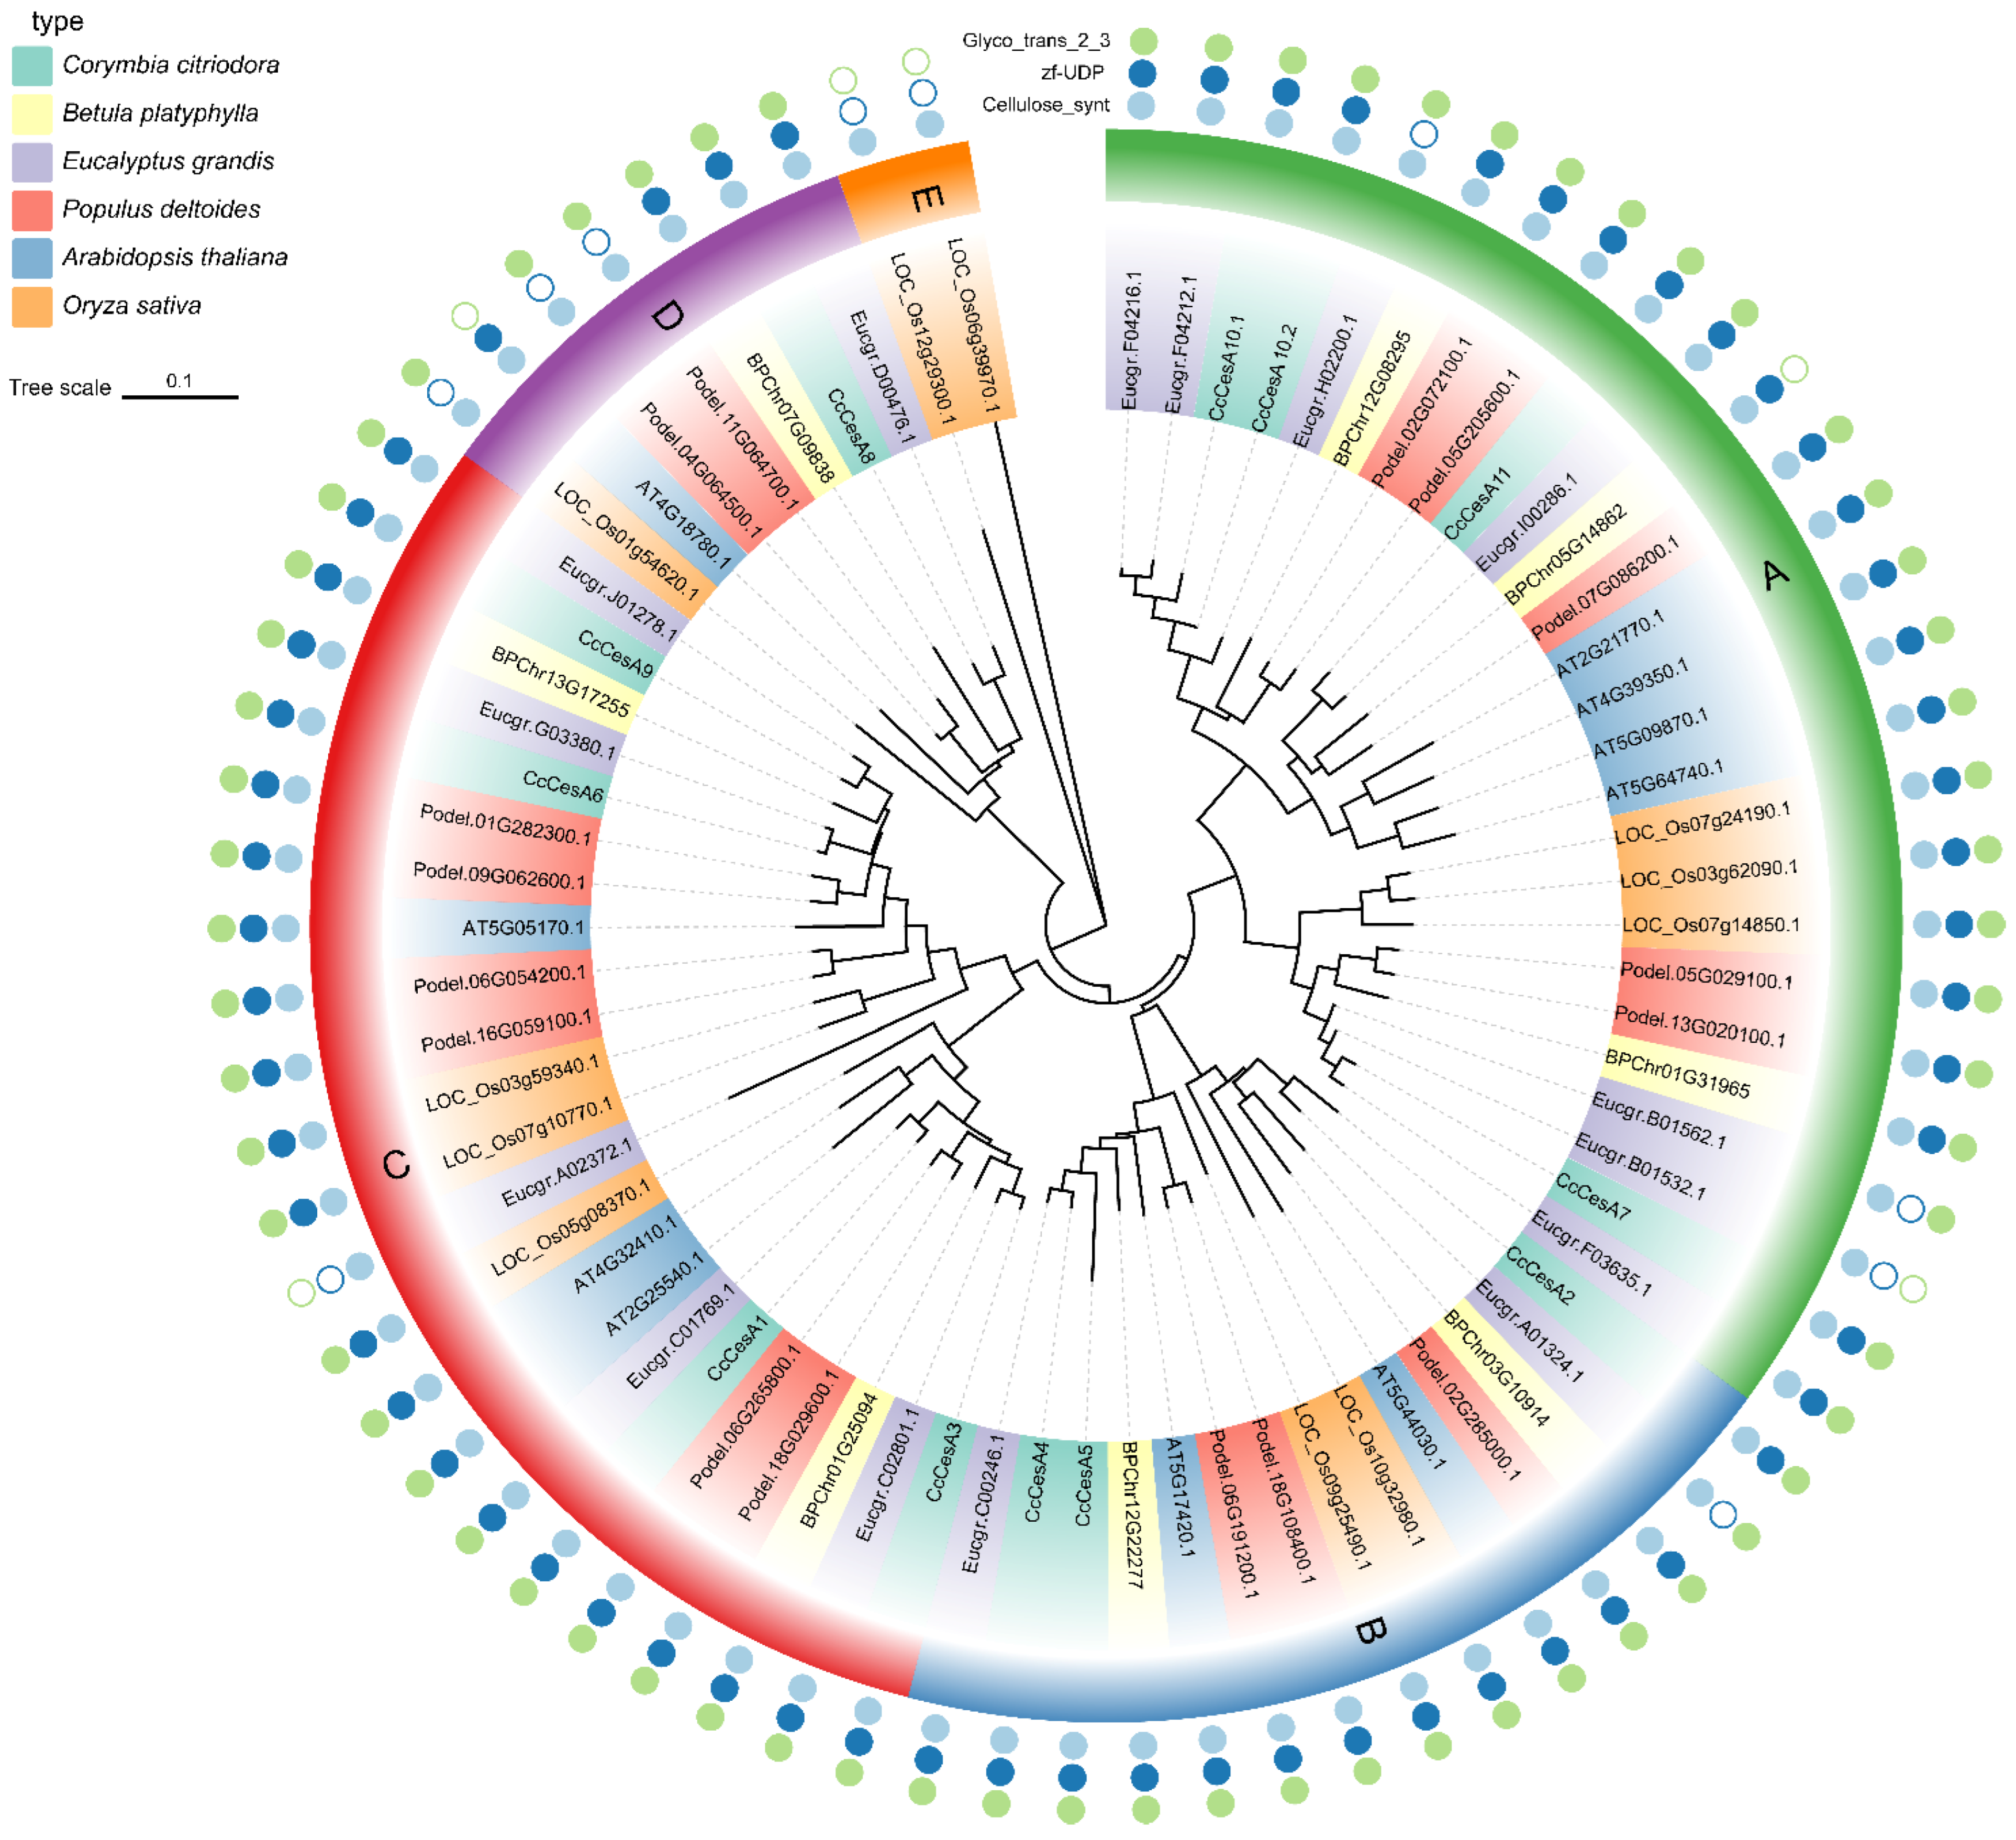 Forests | Free Full-Text | Genome-Wide Identification and Expression  Analysis of CesA Gene Family in Corymbia citriodora